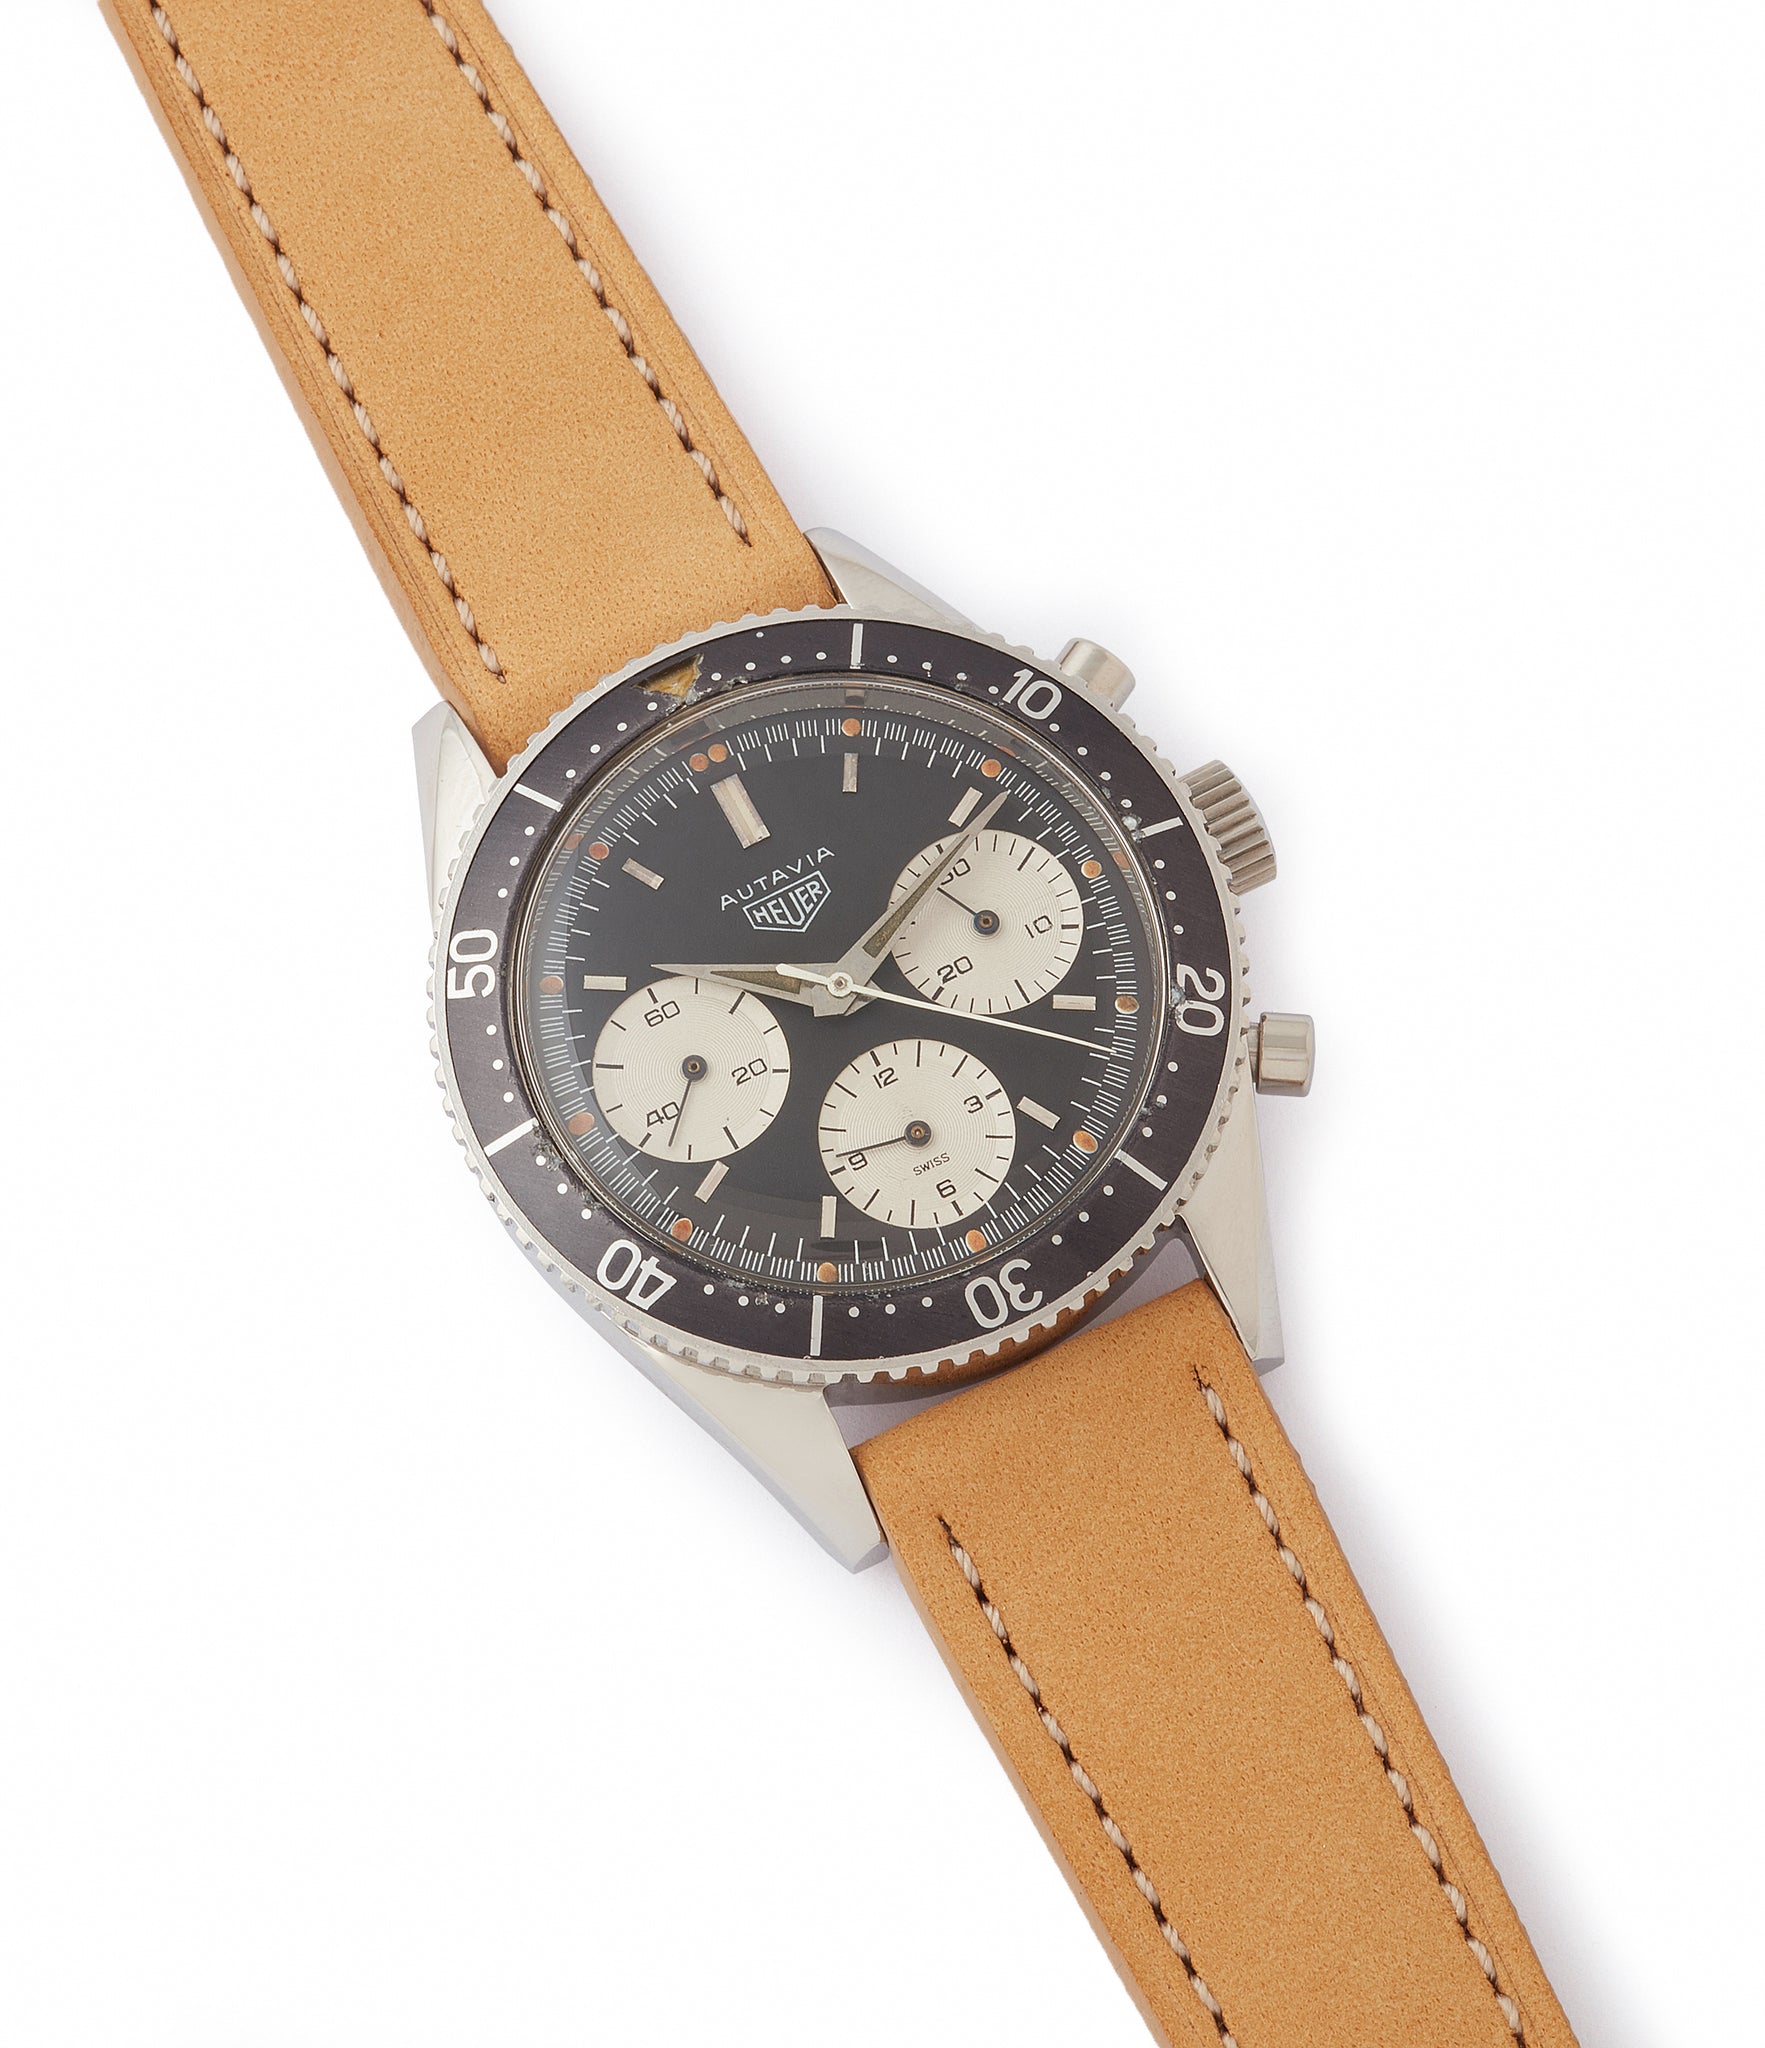 selling vintage Heuer Autavia 2446 Second Execution Valjoux 72 rare first-owner chronograph steel racing sport watch for sale online at A Collected Man London UK rare watch specilaist